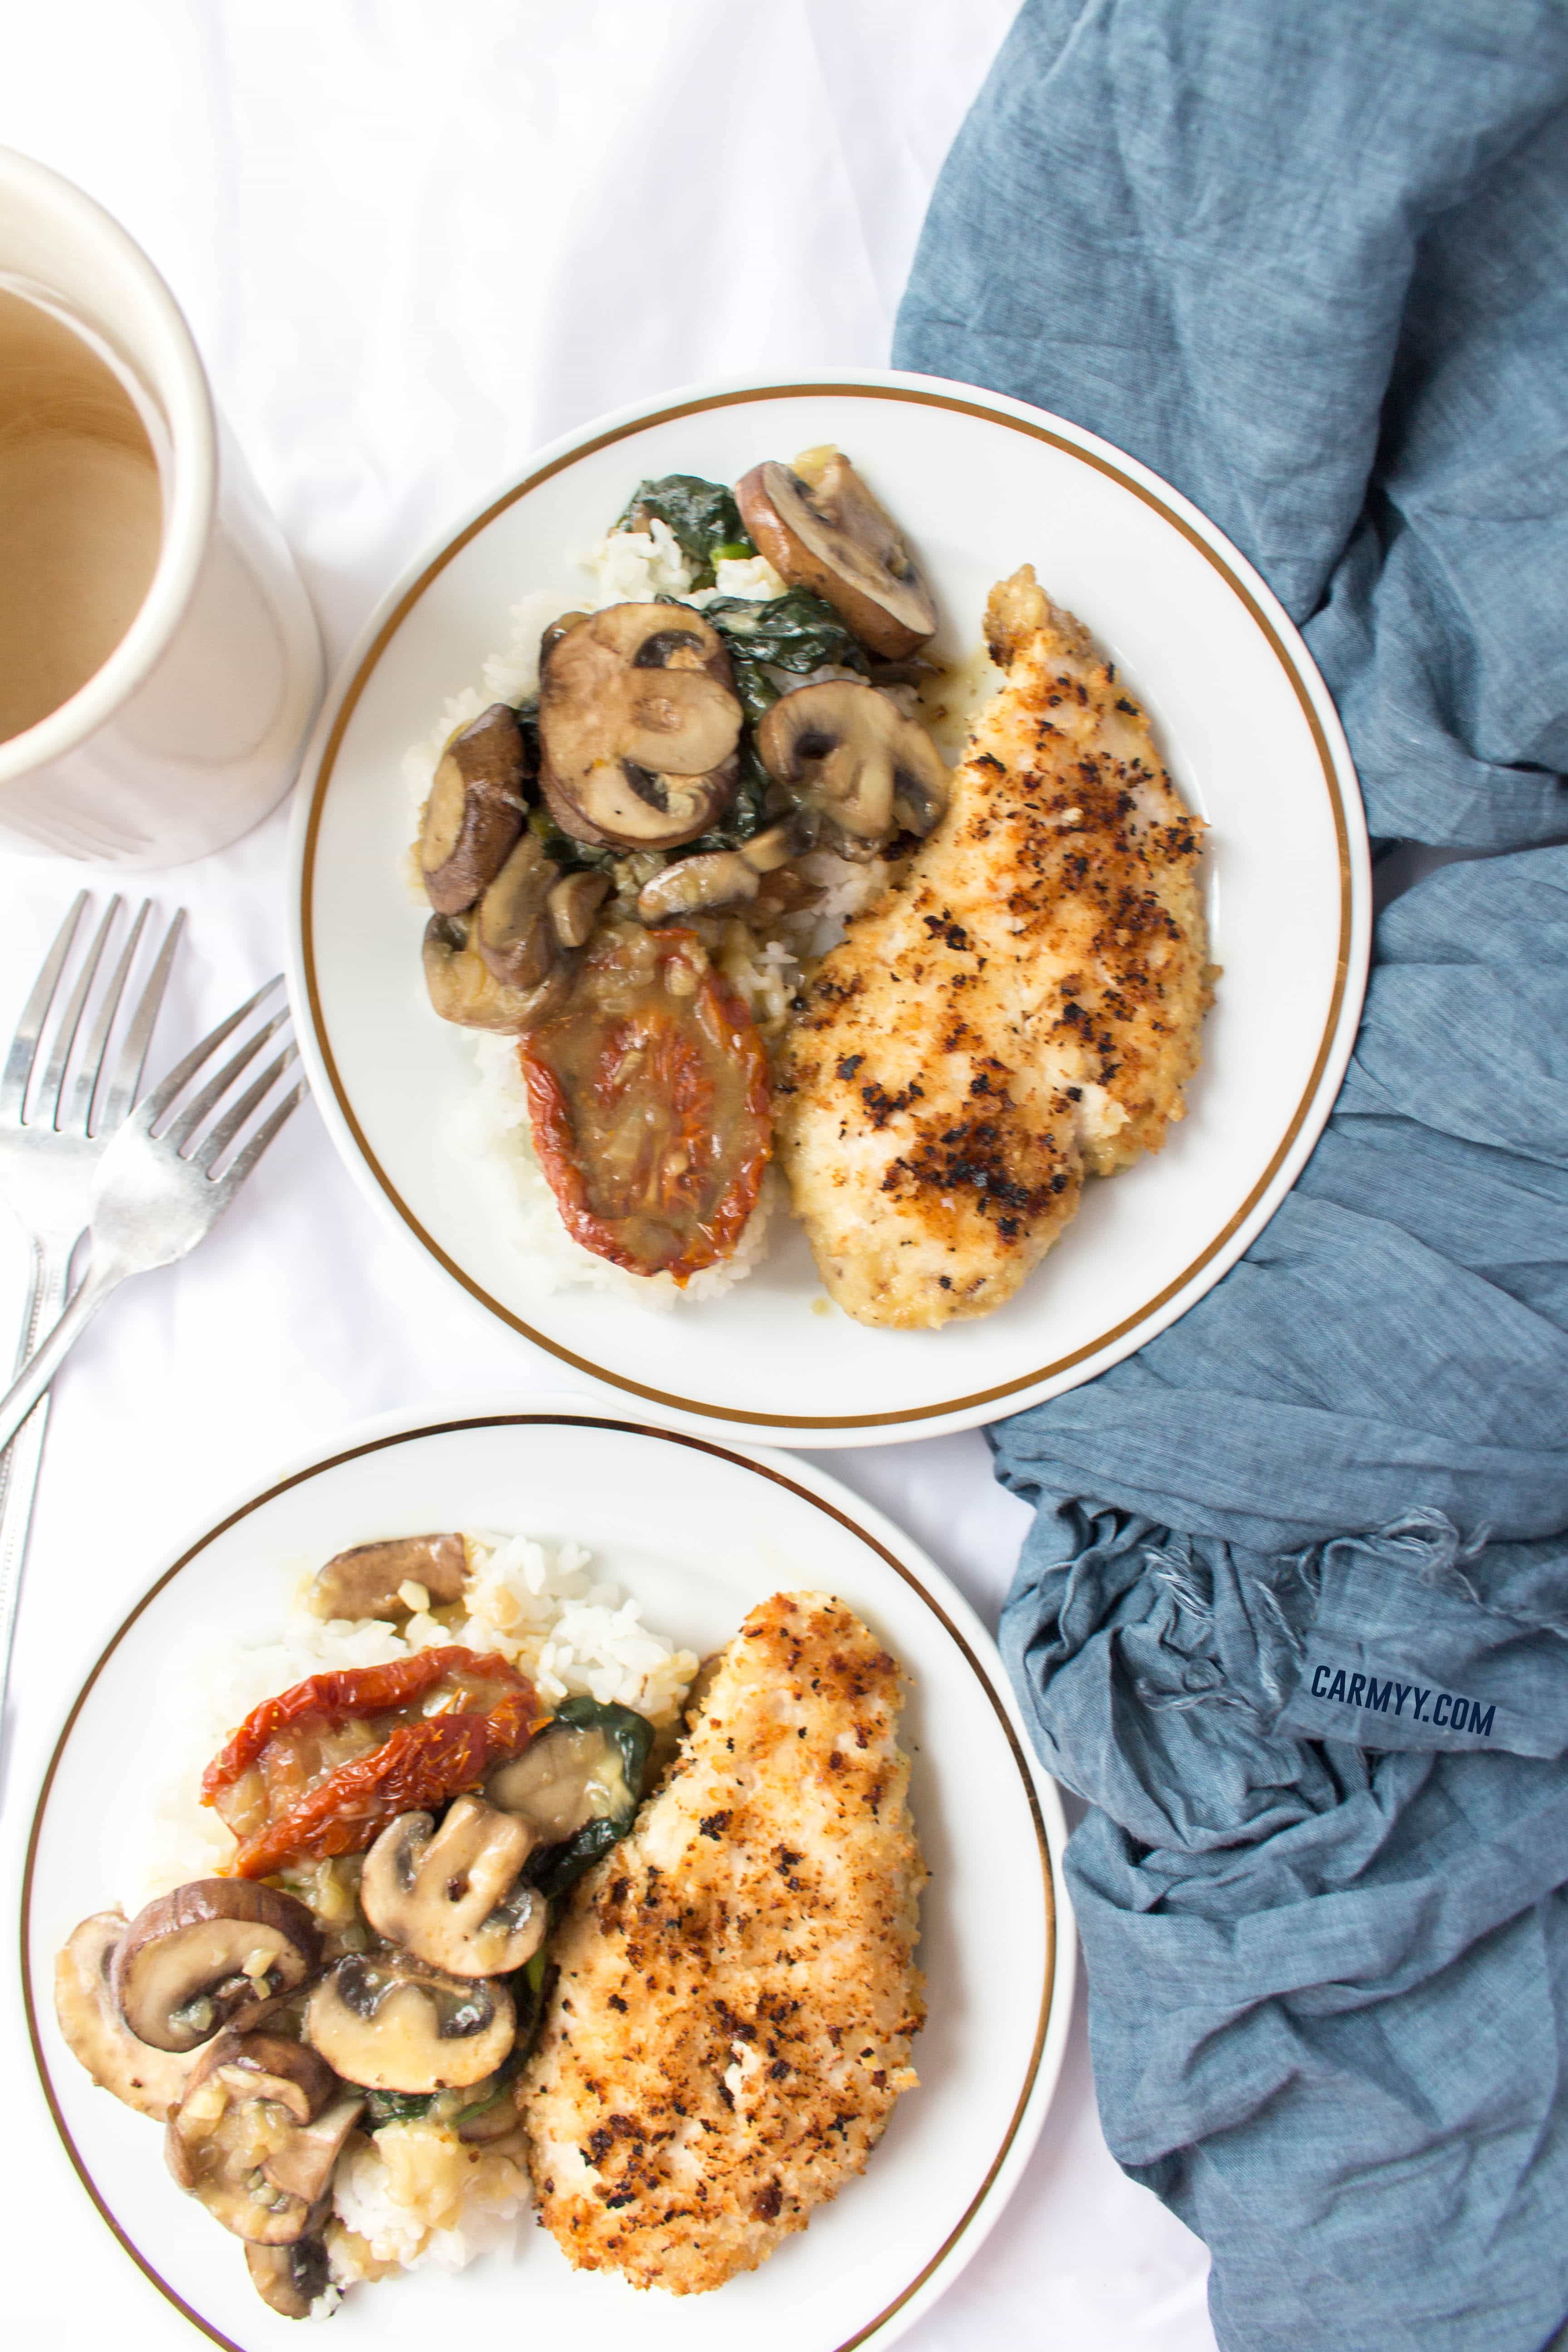 This creamy one pot chicken is made with no cream and packed with flavour! Made with a base of mushroom, spinach, and sun dried tomato, this creamy one pot chicken is the perfect recipe for a lazy dinner under an hour.